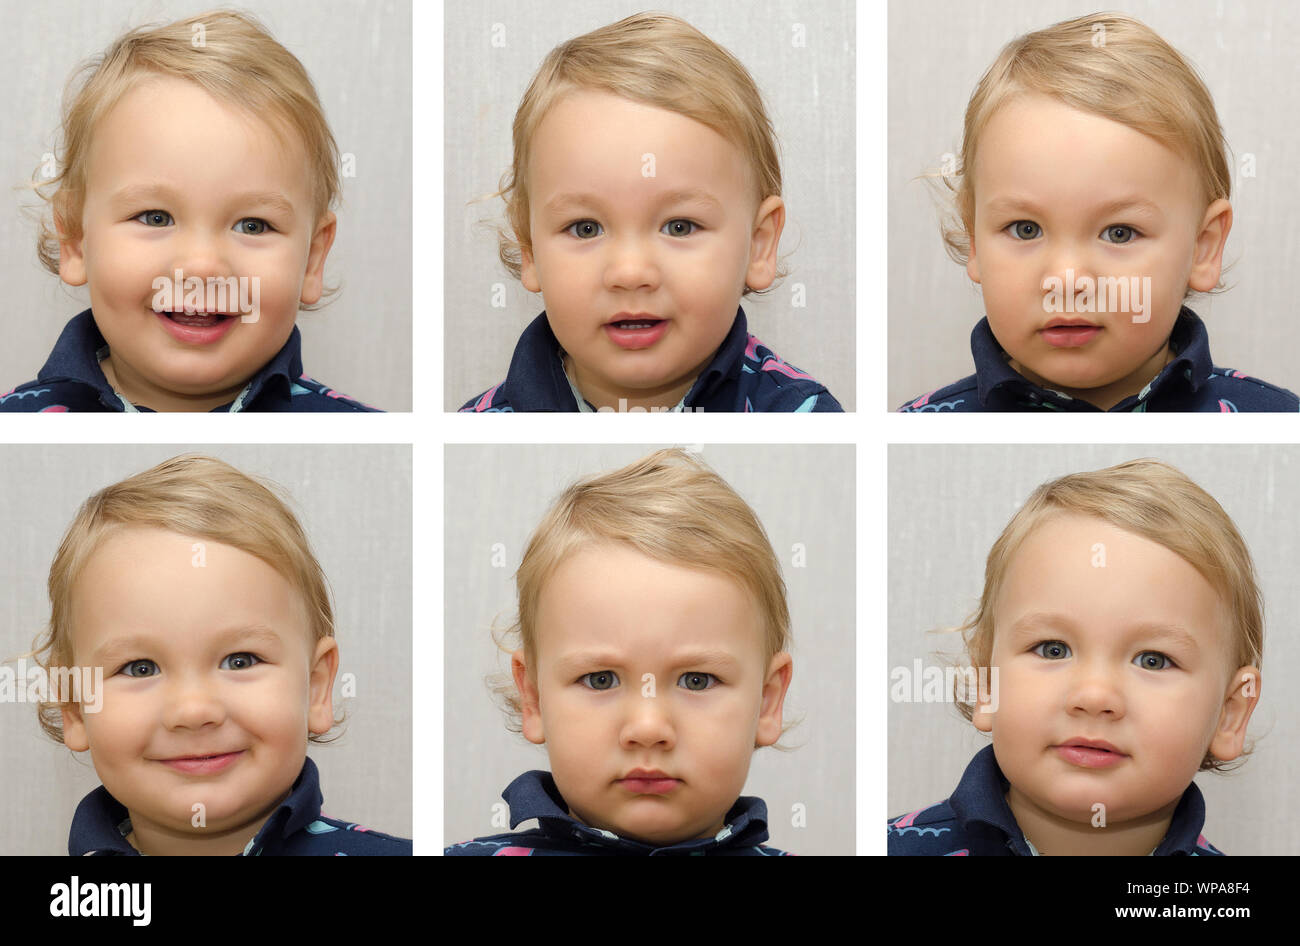 Different Emotions Child High Resolution Stock Photography and Images -  Alamy